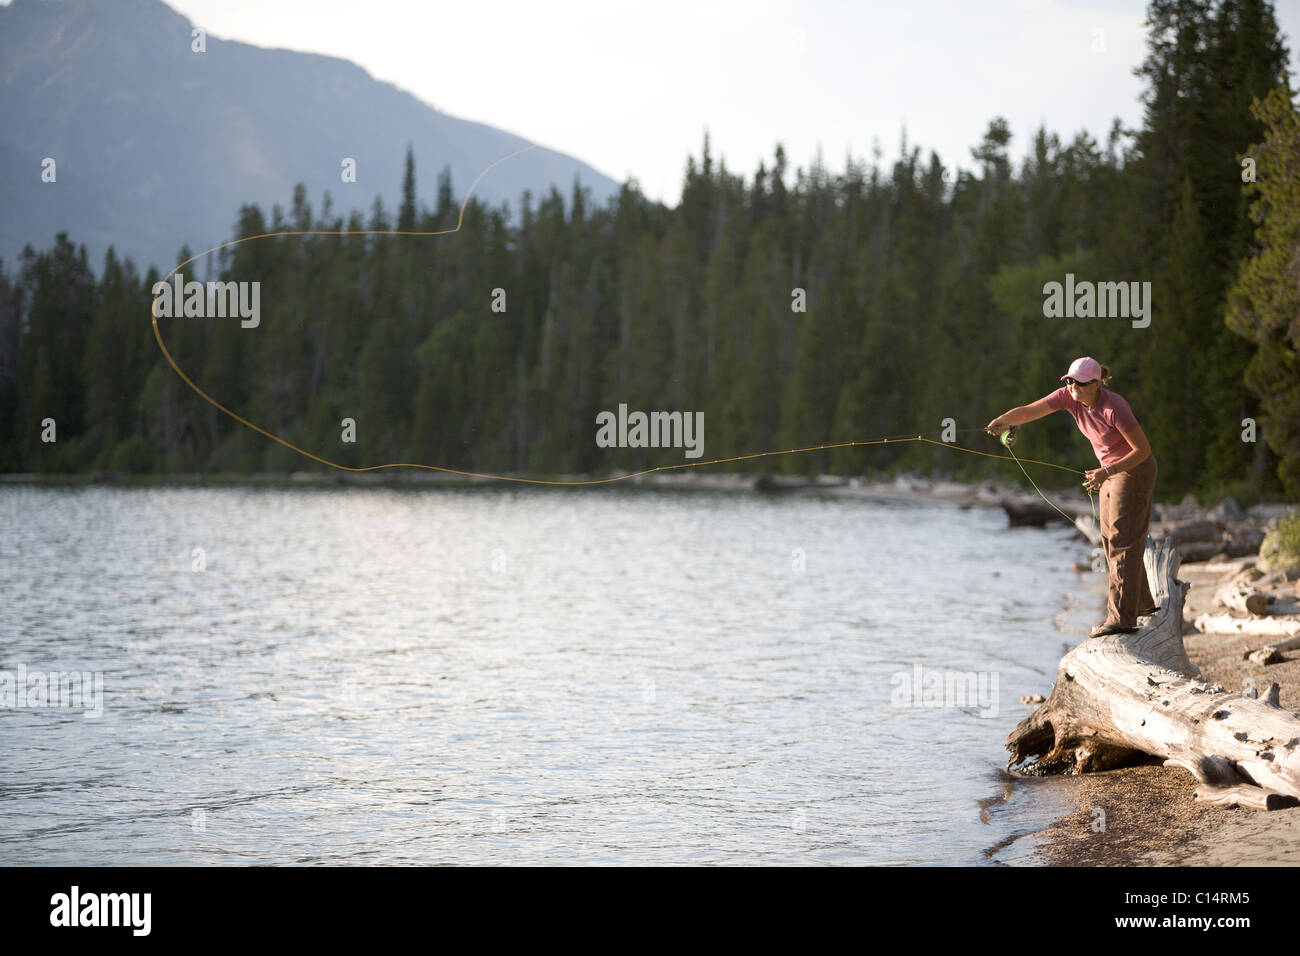 A woman casts her flyline from the shore of a lake. Stock Photo